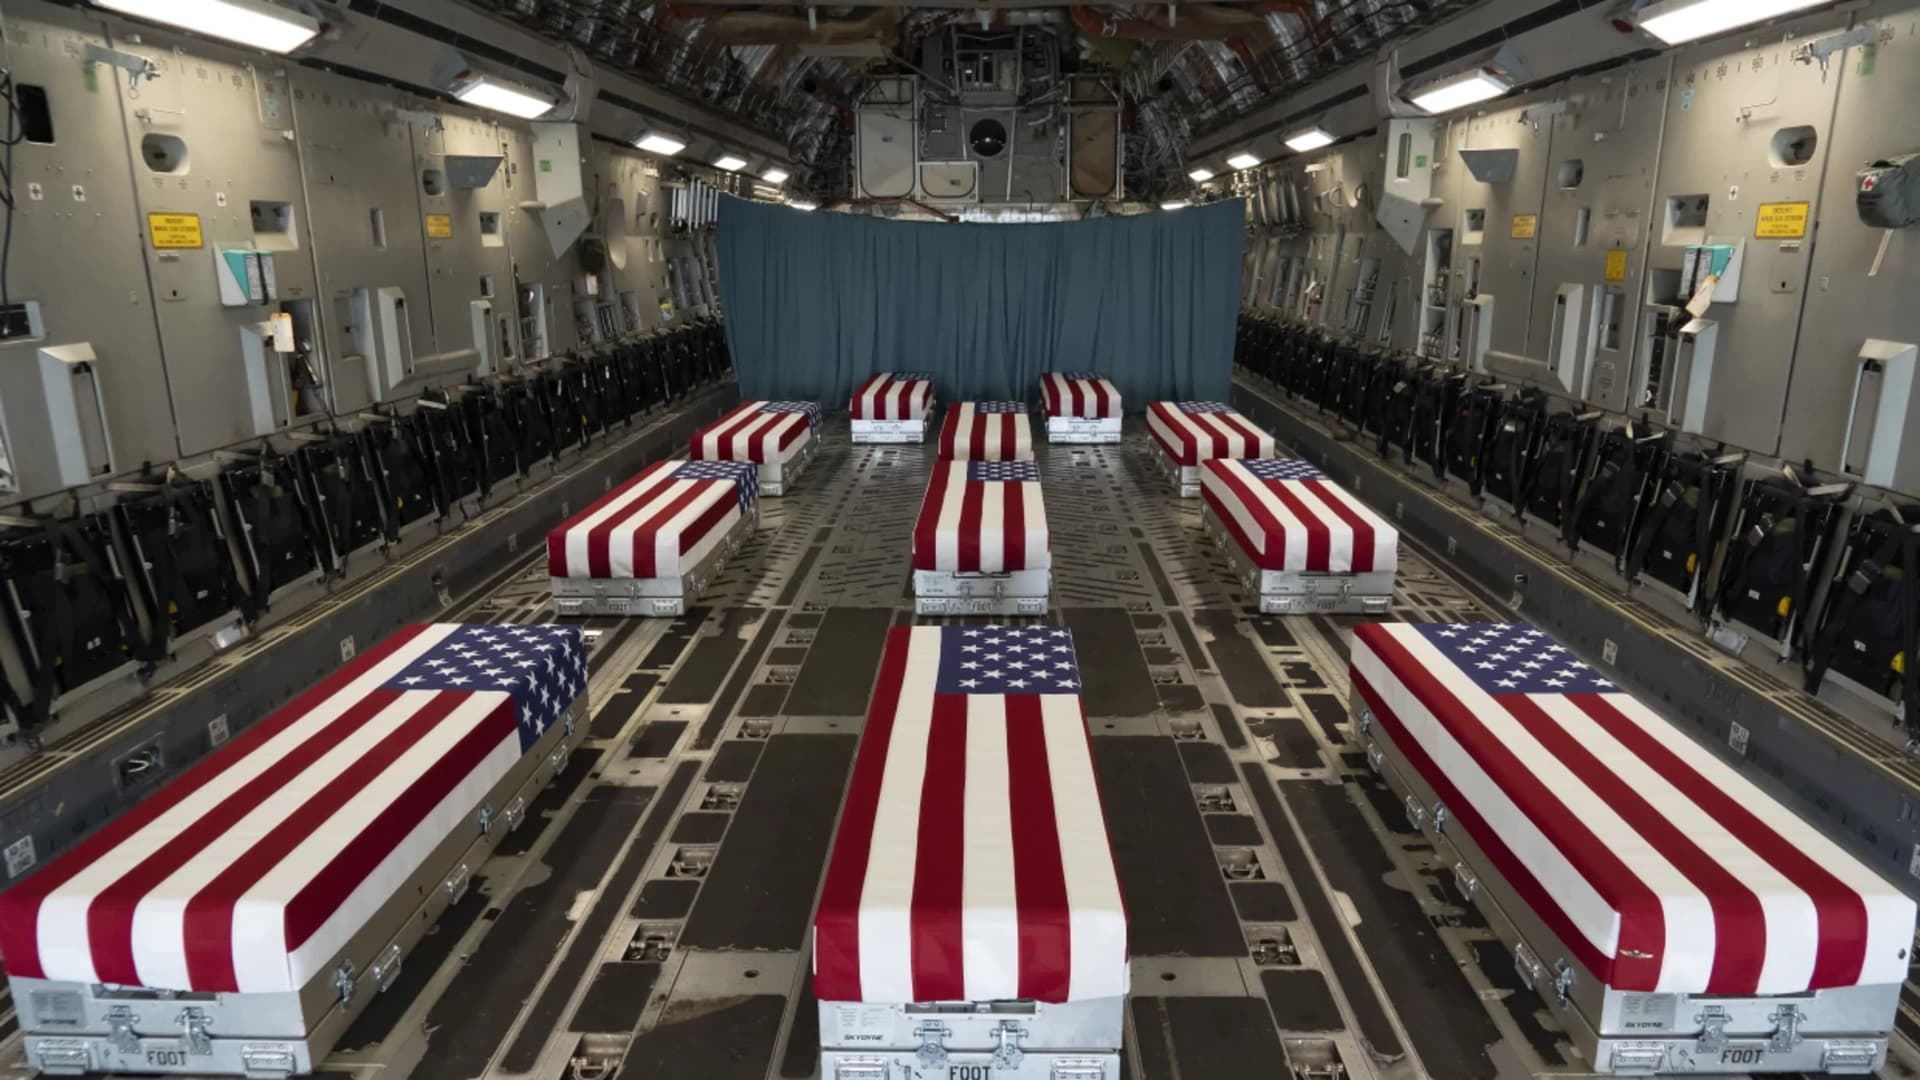 In this image provided by the U.S. Air Force, flag-draped transfer cases line the inside of a transport plane Sunday before a dignified transfer at Dover Air Force Base, Del. The fallen service members were killed while supporting evacuations in Kabul, Afghanistan.